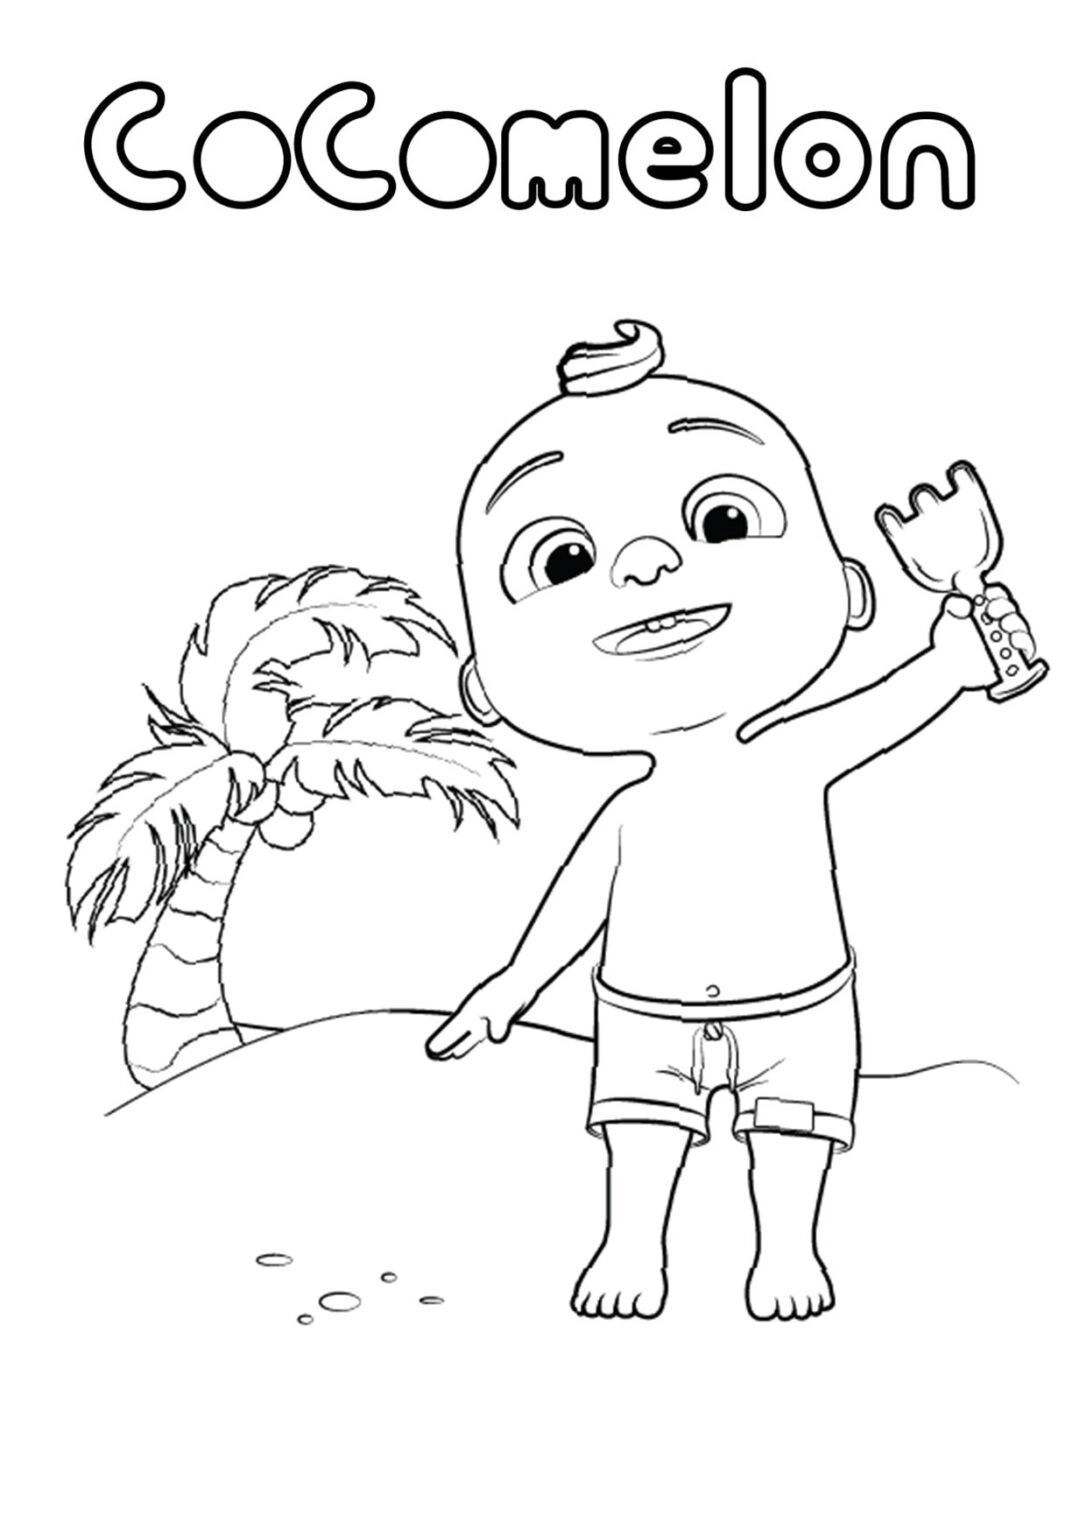 cocomelon jj on the beach coloring page